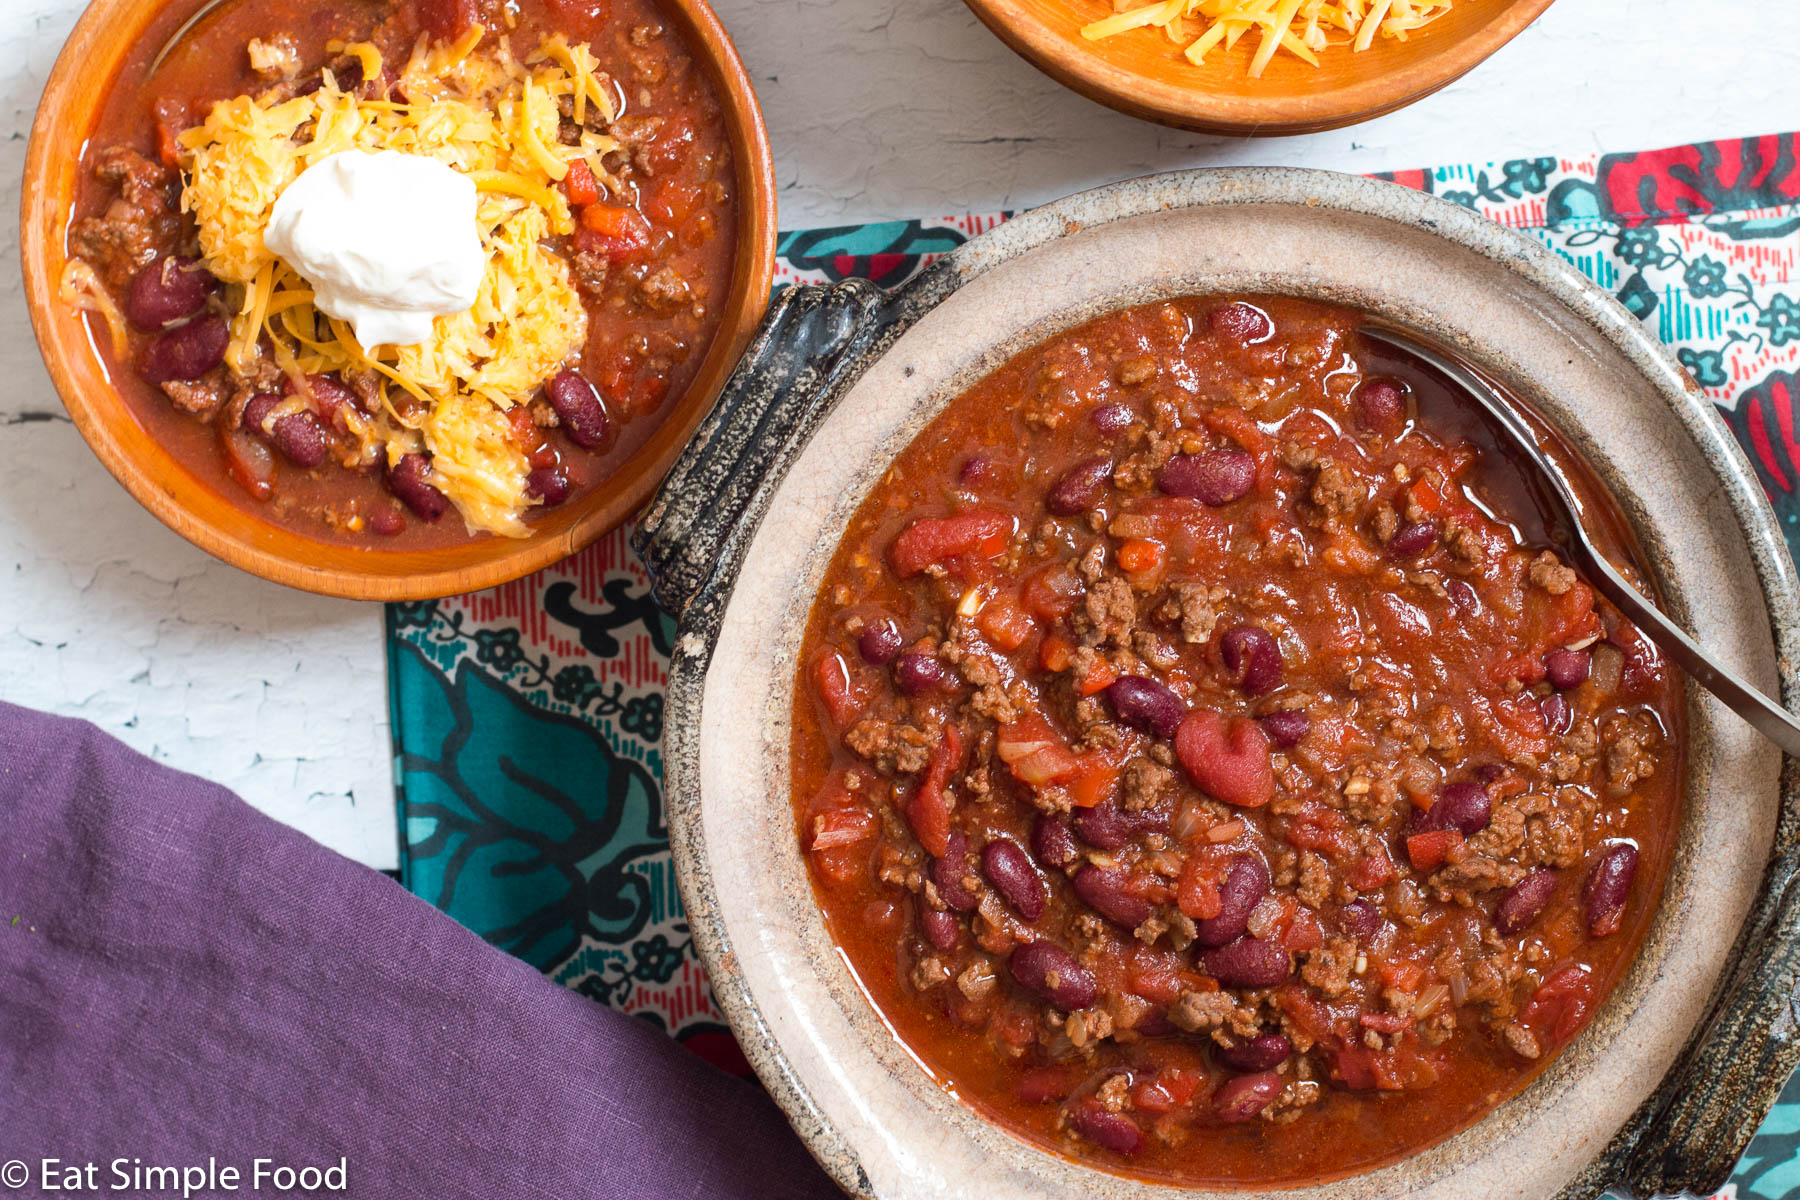 Beef and bean chili in a large brown bowl with a small wood bowl of chili with grated chatter and a spoonful of sour cream.